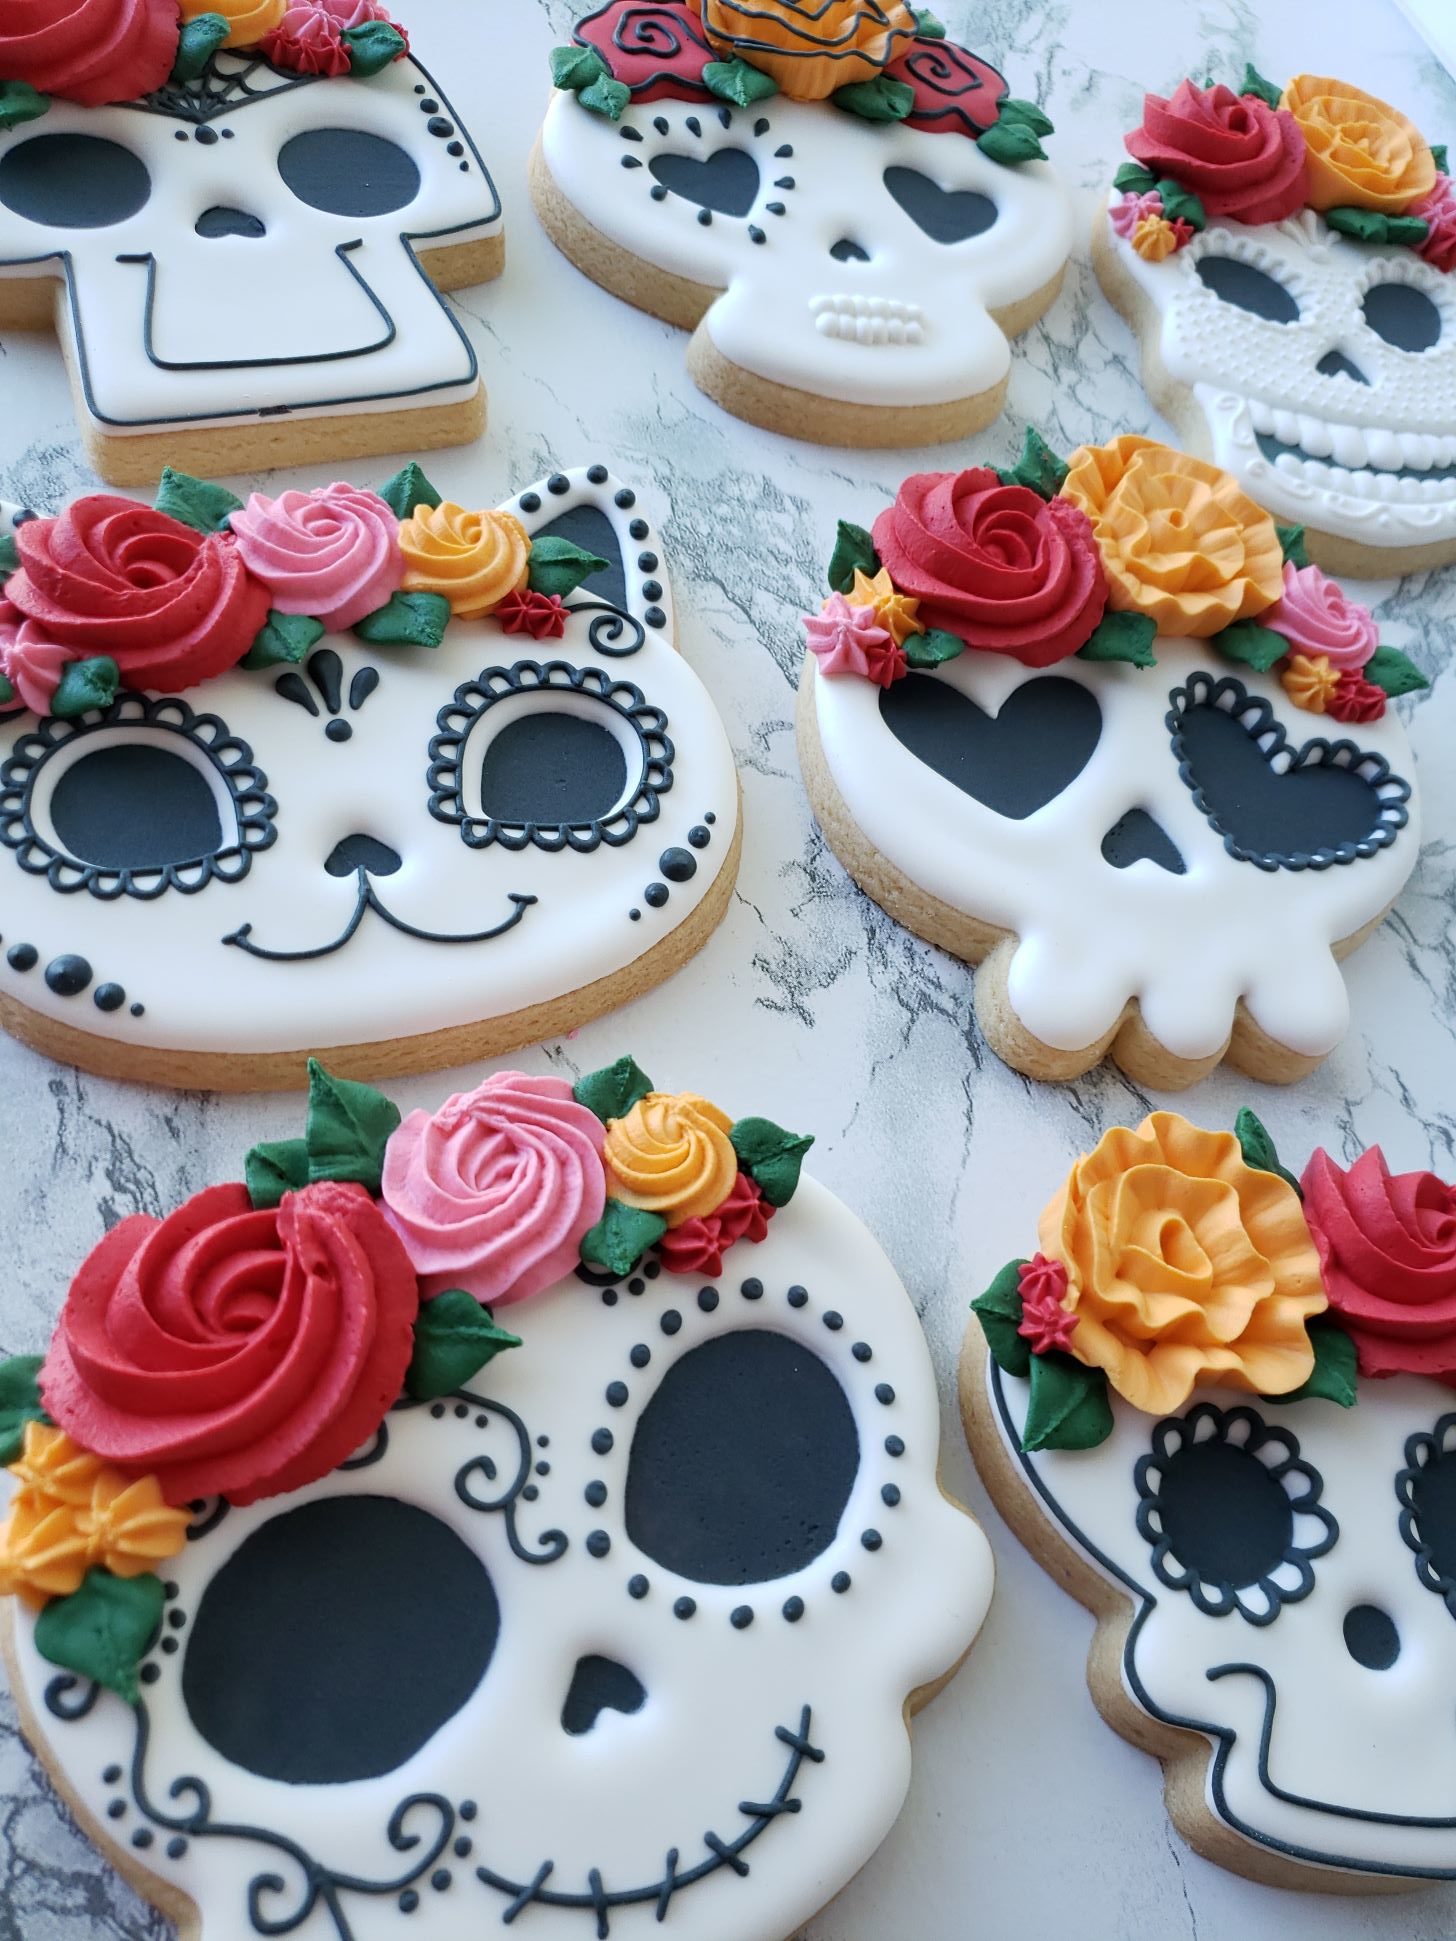 https://paperstreetparlour.com/wp-content/uploads/2022/09/sugar-skull-cookies-close-up-rotated.jpg